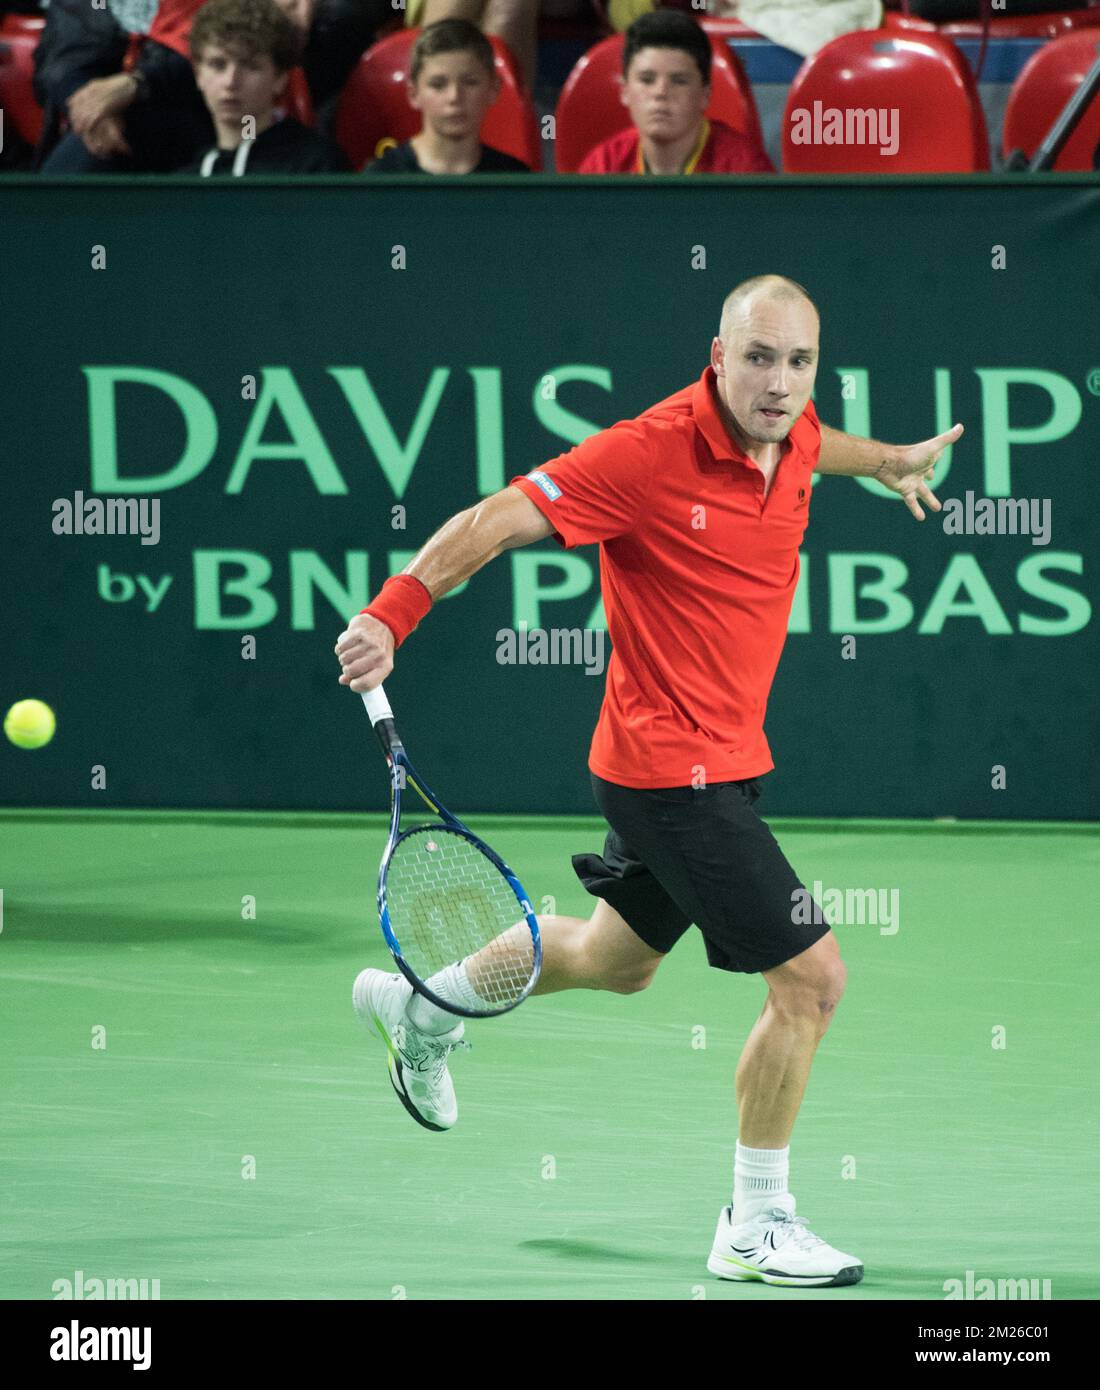 Belgian Steve Darcis pictured during the first game between Belgian Steve  Darcis and Italian Paolo Lorenzi at the Davis Cup World Group quarterfinal  between Belgium and Italy, Friday 07 April 2017, in